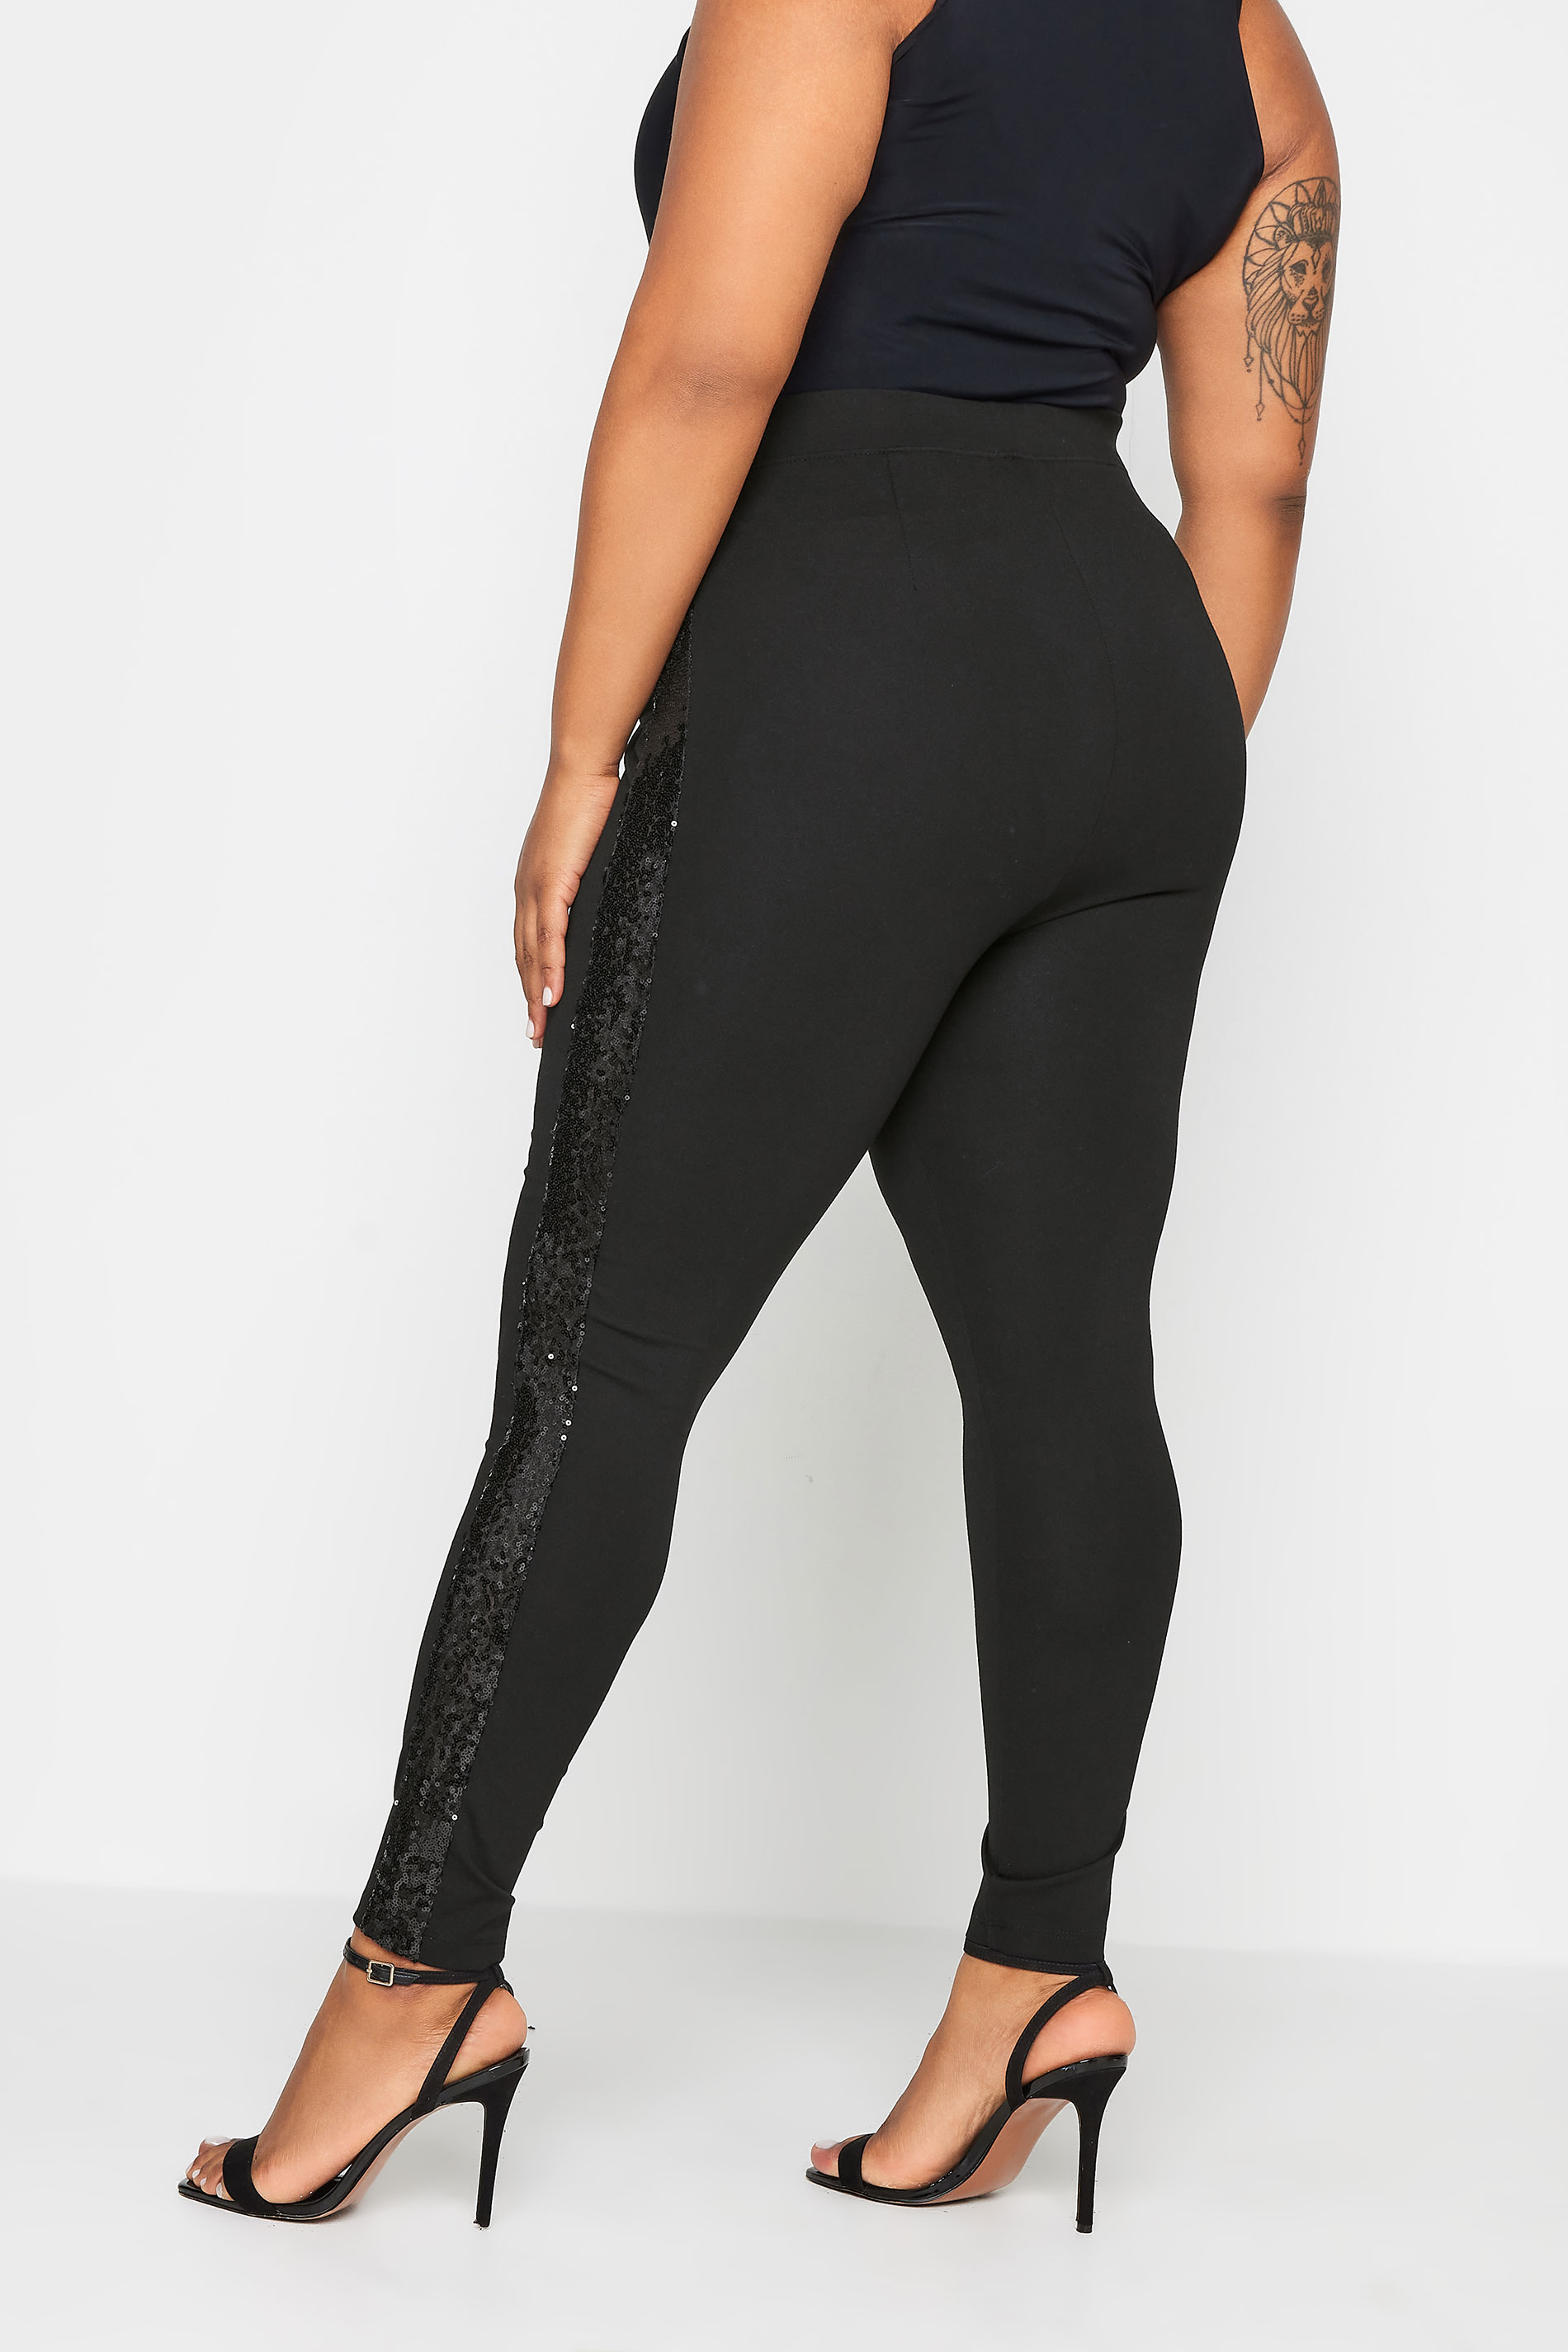 YOURS Plus Size Black Sequin Side Stripe Leggings | Yours Clothing 3